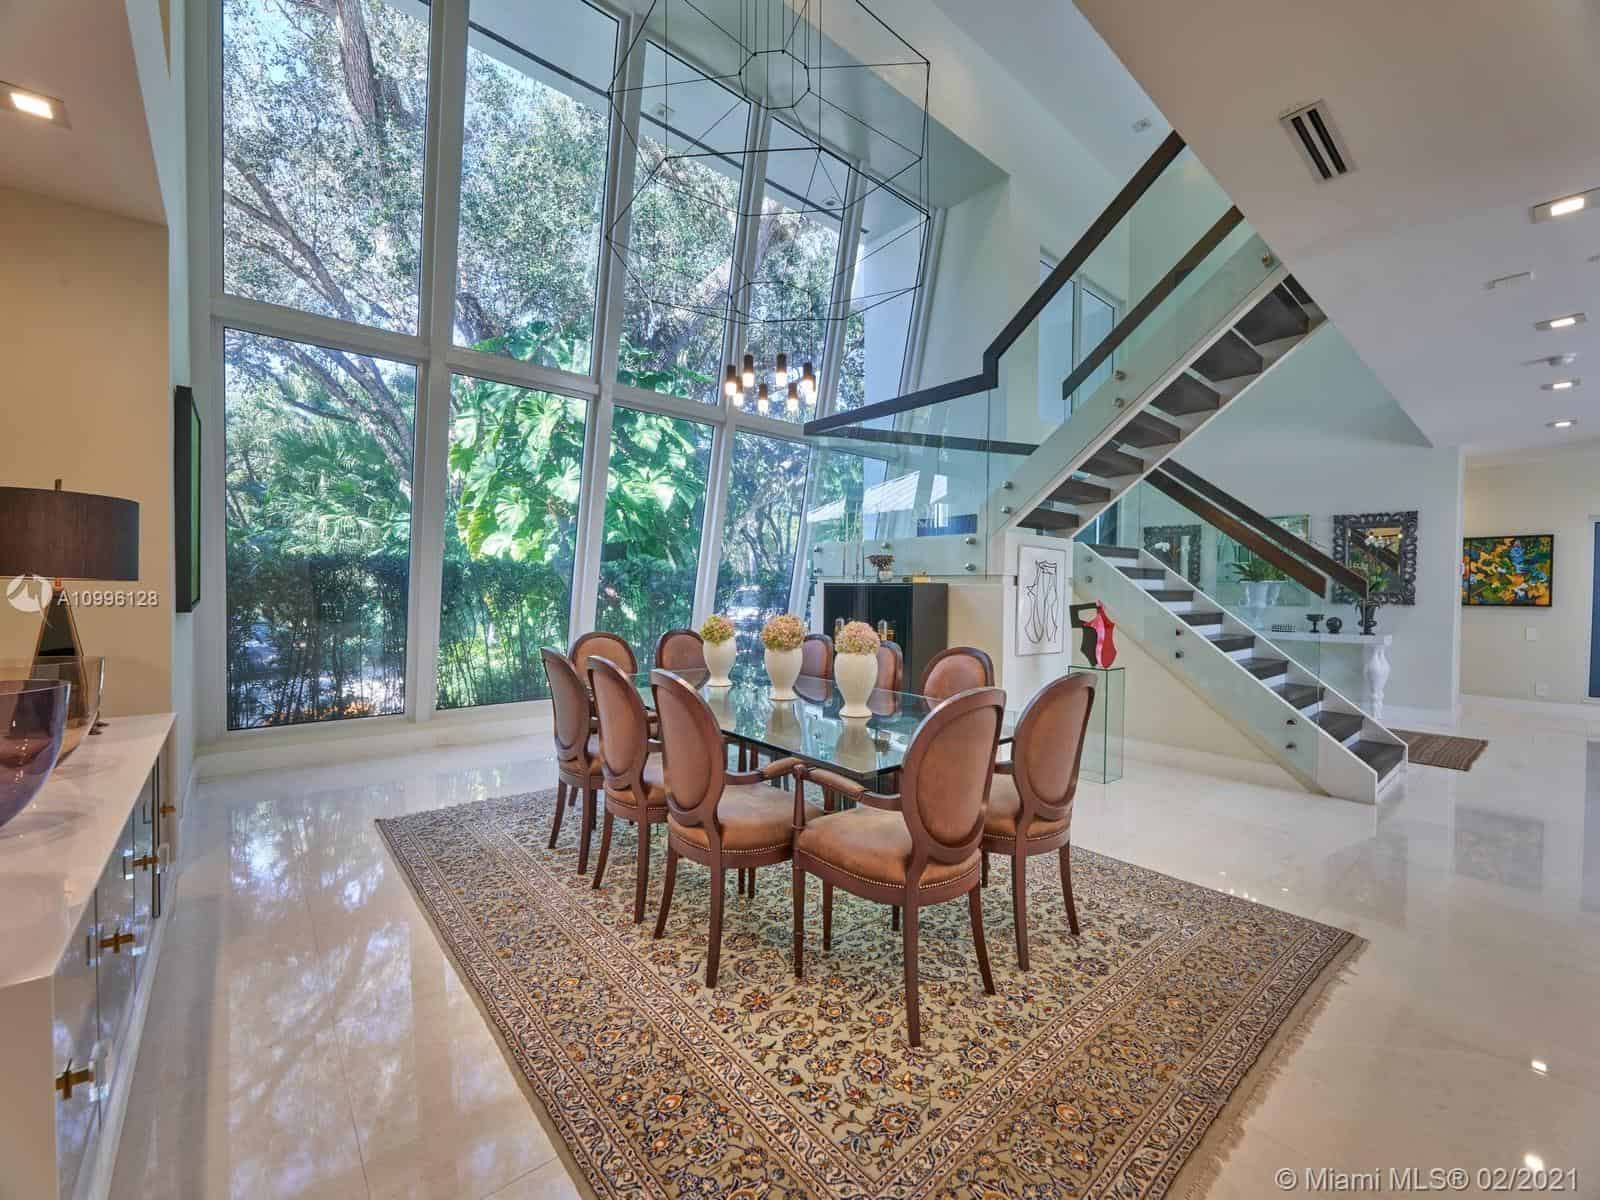 9321 Banyan Dr Coral Gables: Ultra-Luxury Homes for Sale in Coral Gables